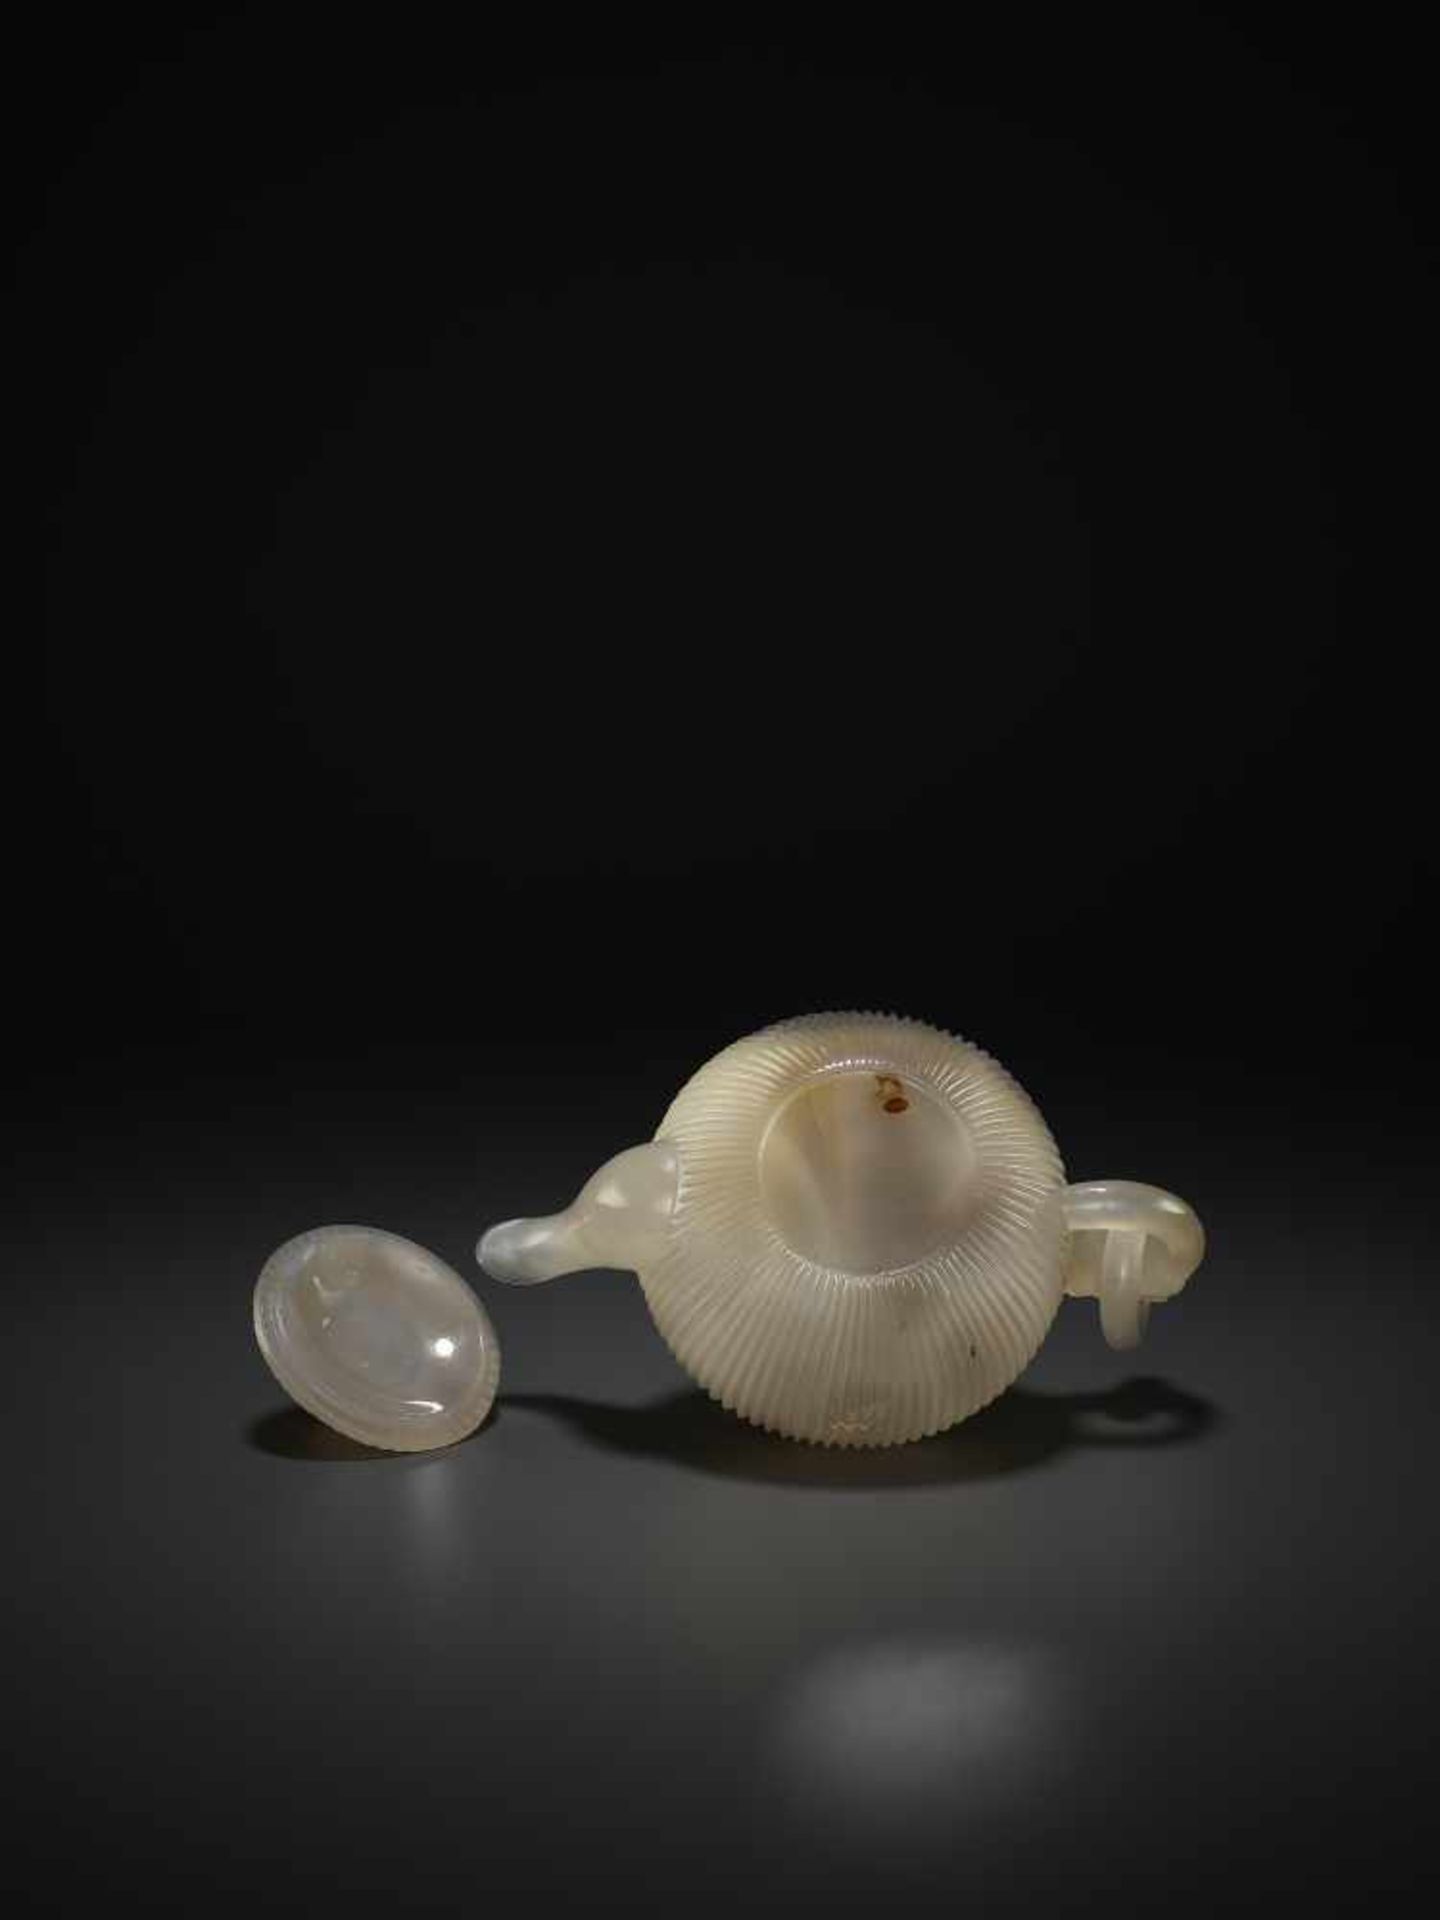 A MUGHAL STYLE AGATE TEAPOT, QING DYNASTY China, 1644-1911. Finely carved with a ribbed body and - Image 10 of 11